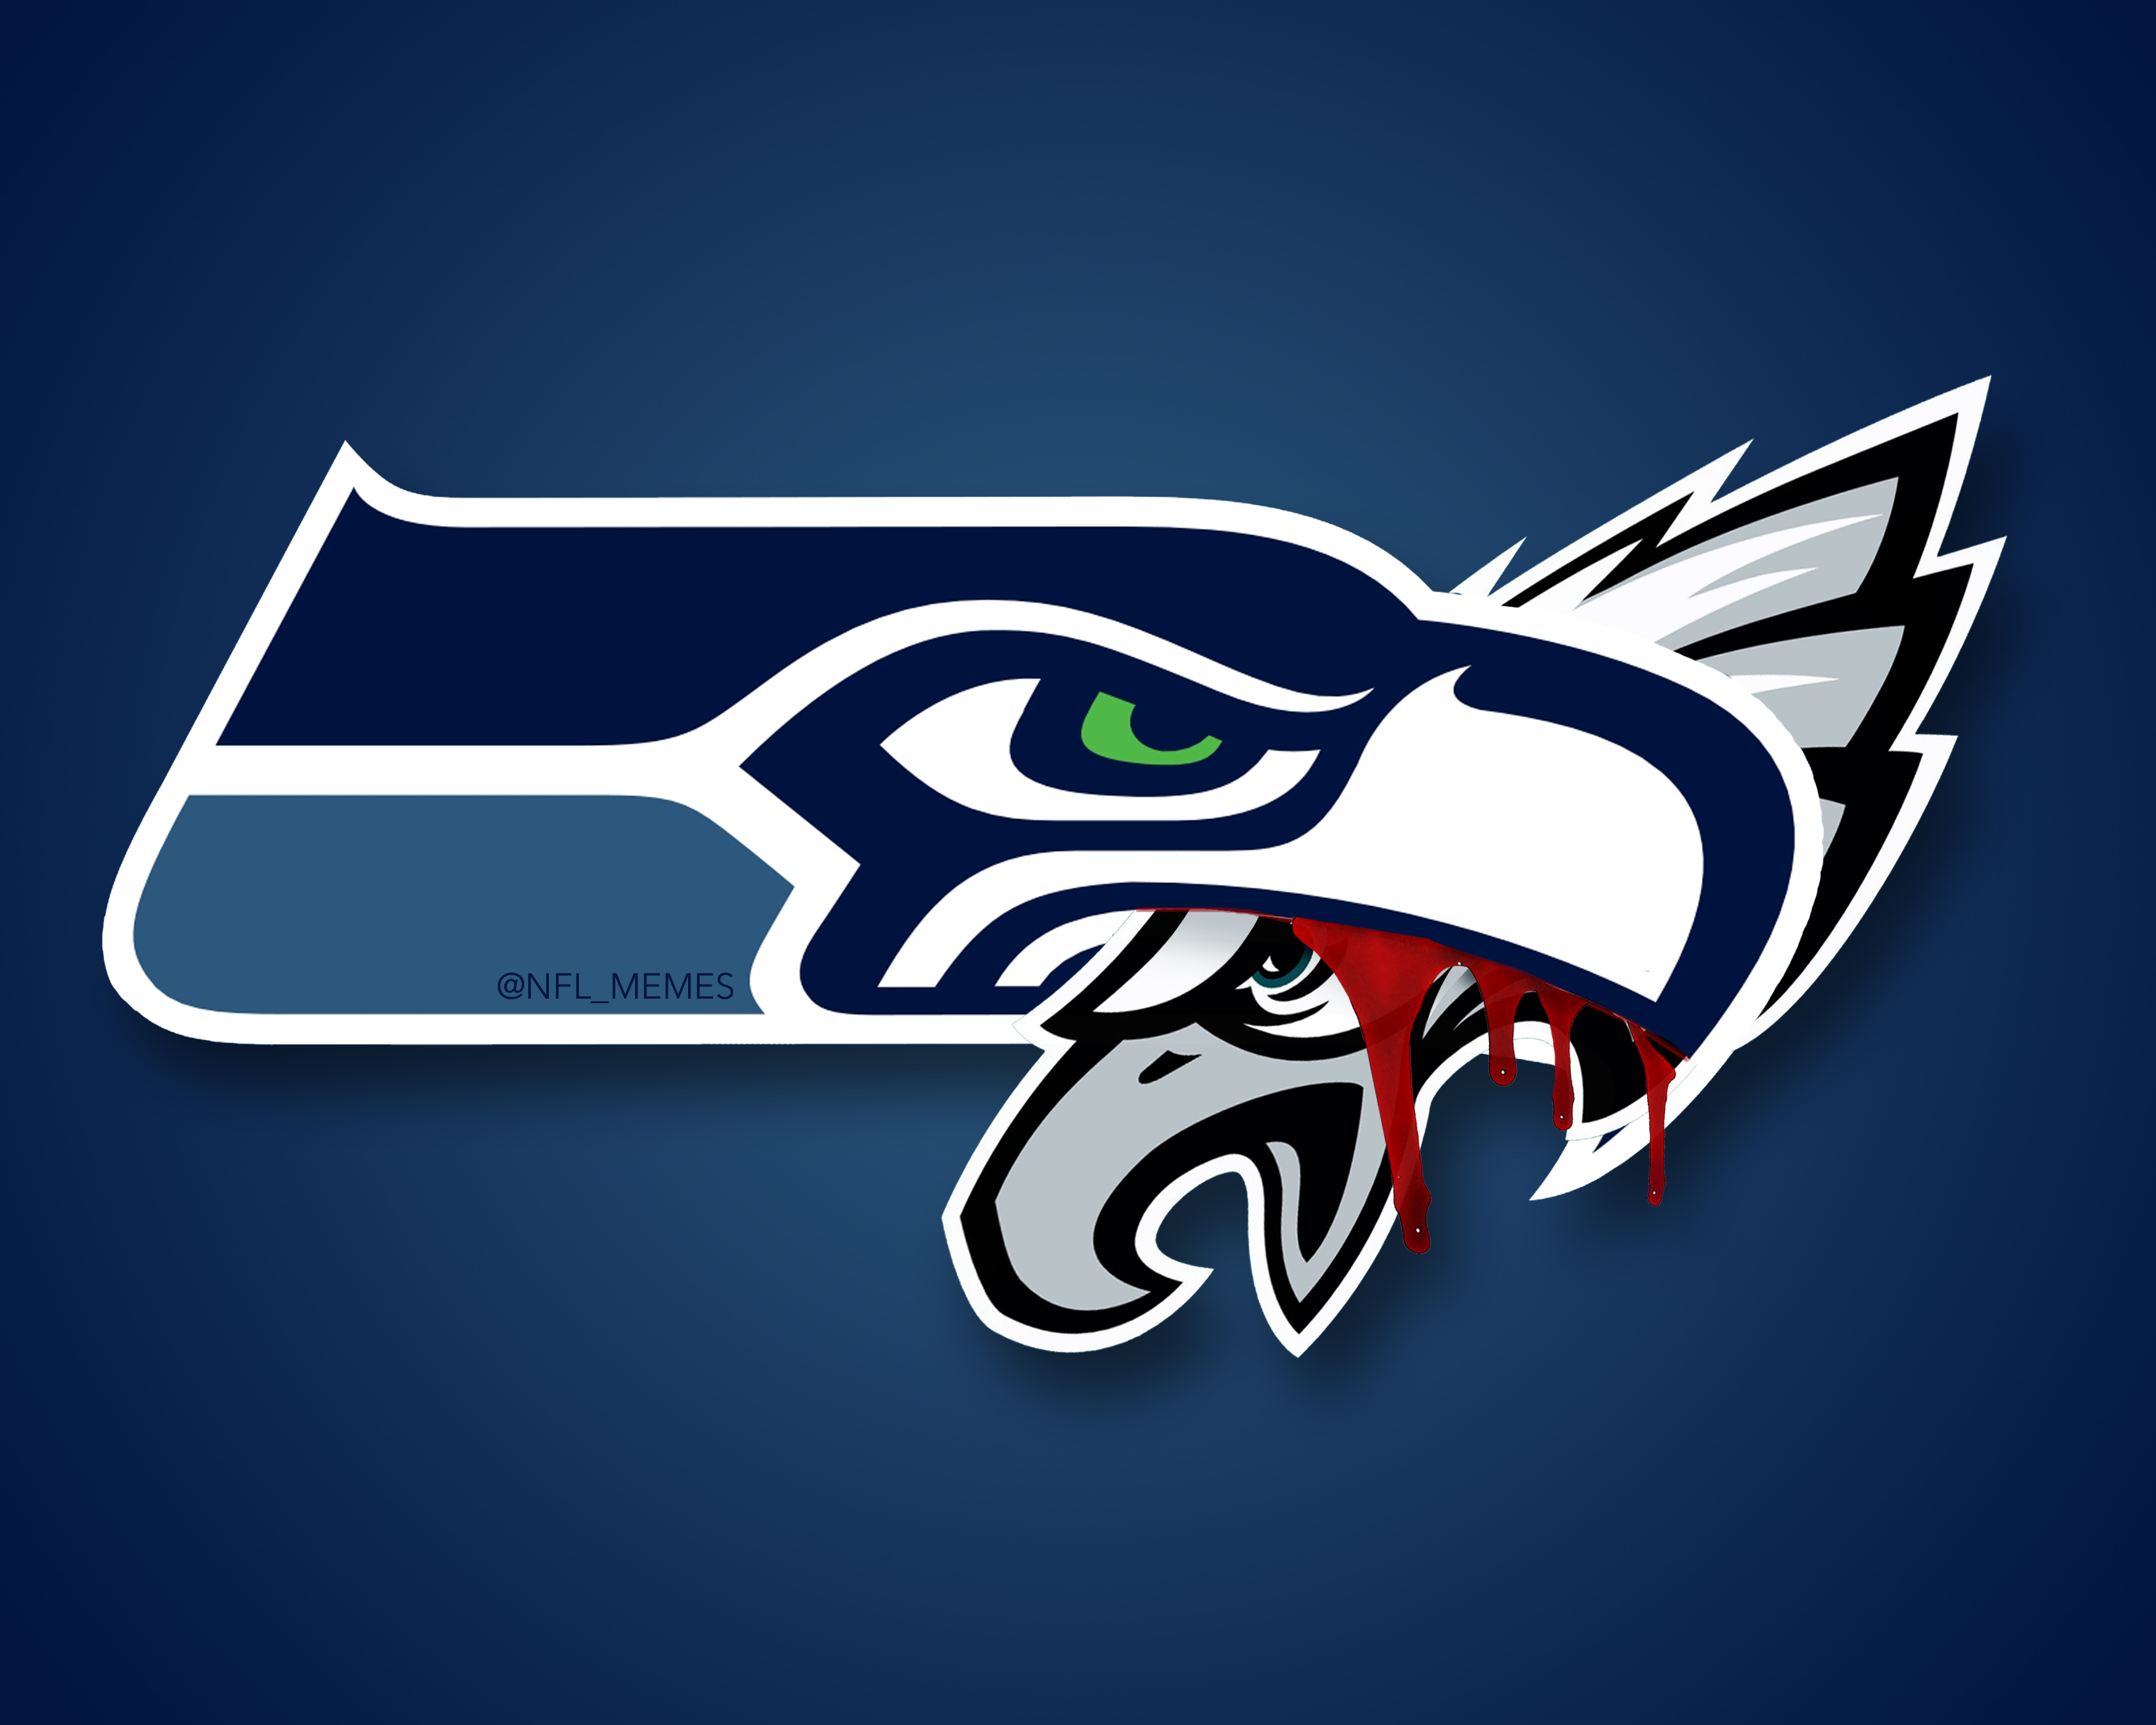 Seahawks Alter Logo Following Win Against Eagles - Daily Snark